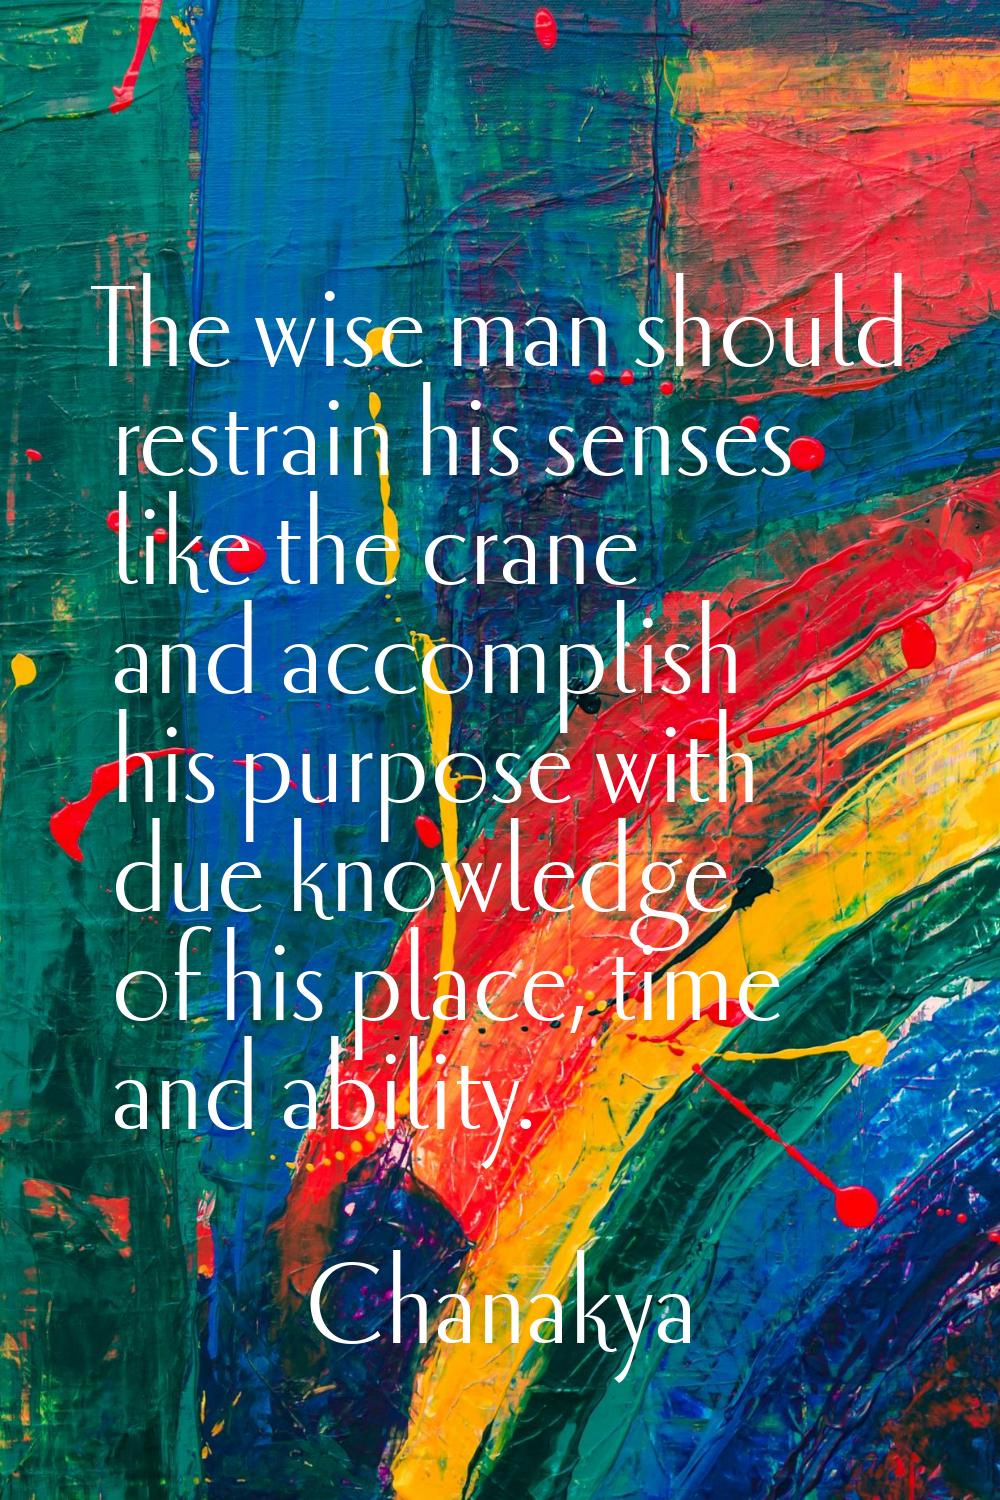 The wise man should restrain his senses like the crane and accomplish his purpose with due knowledg